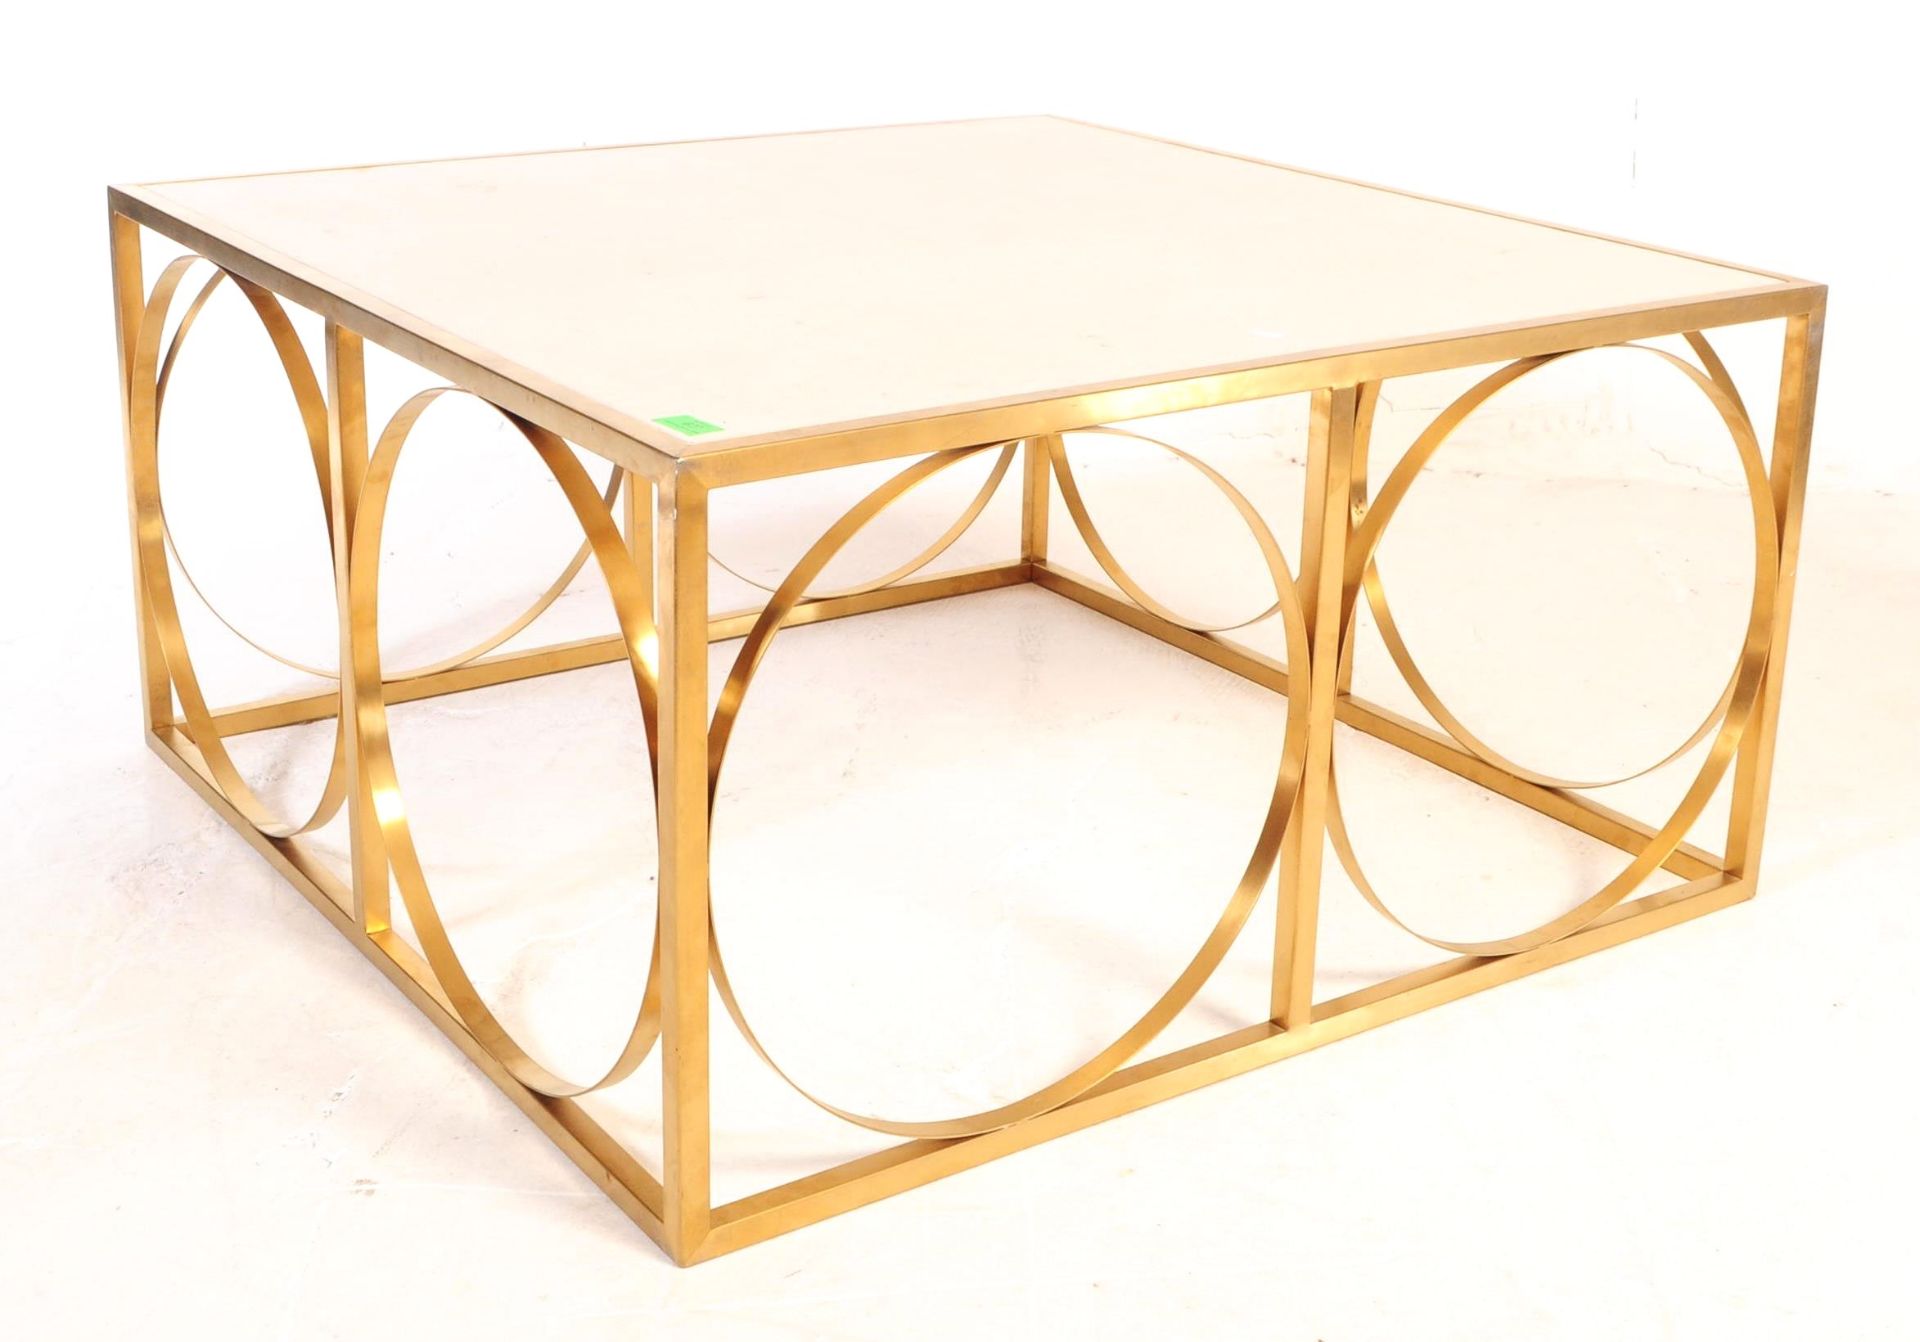 CONTEMPORARY STAINLESS STEEL AND RESIN LOW COFFEE TABLE